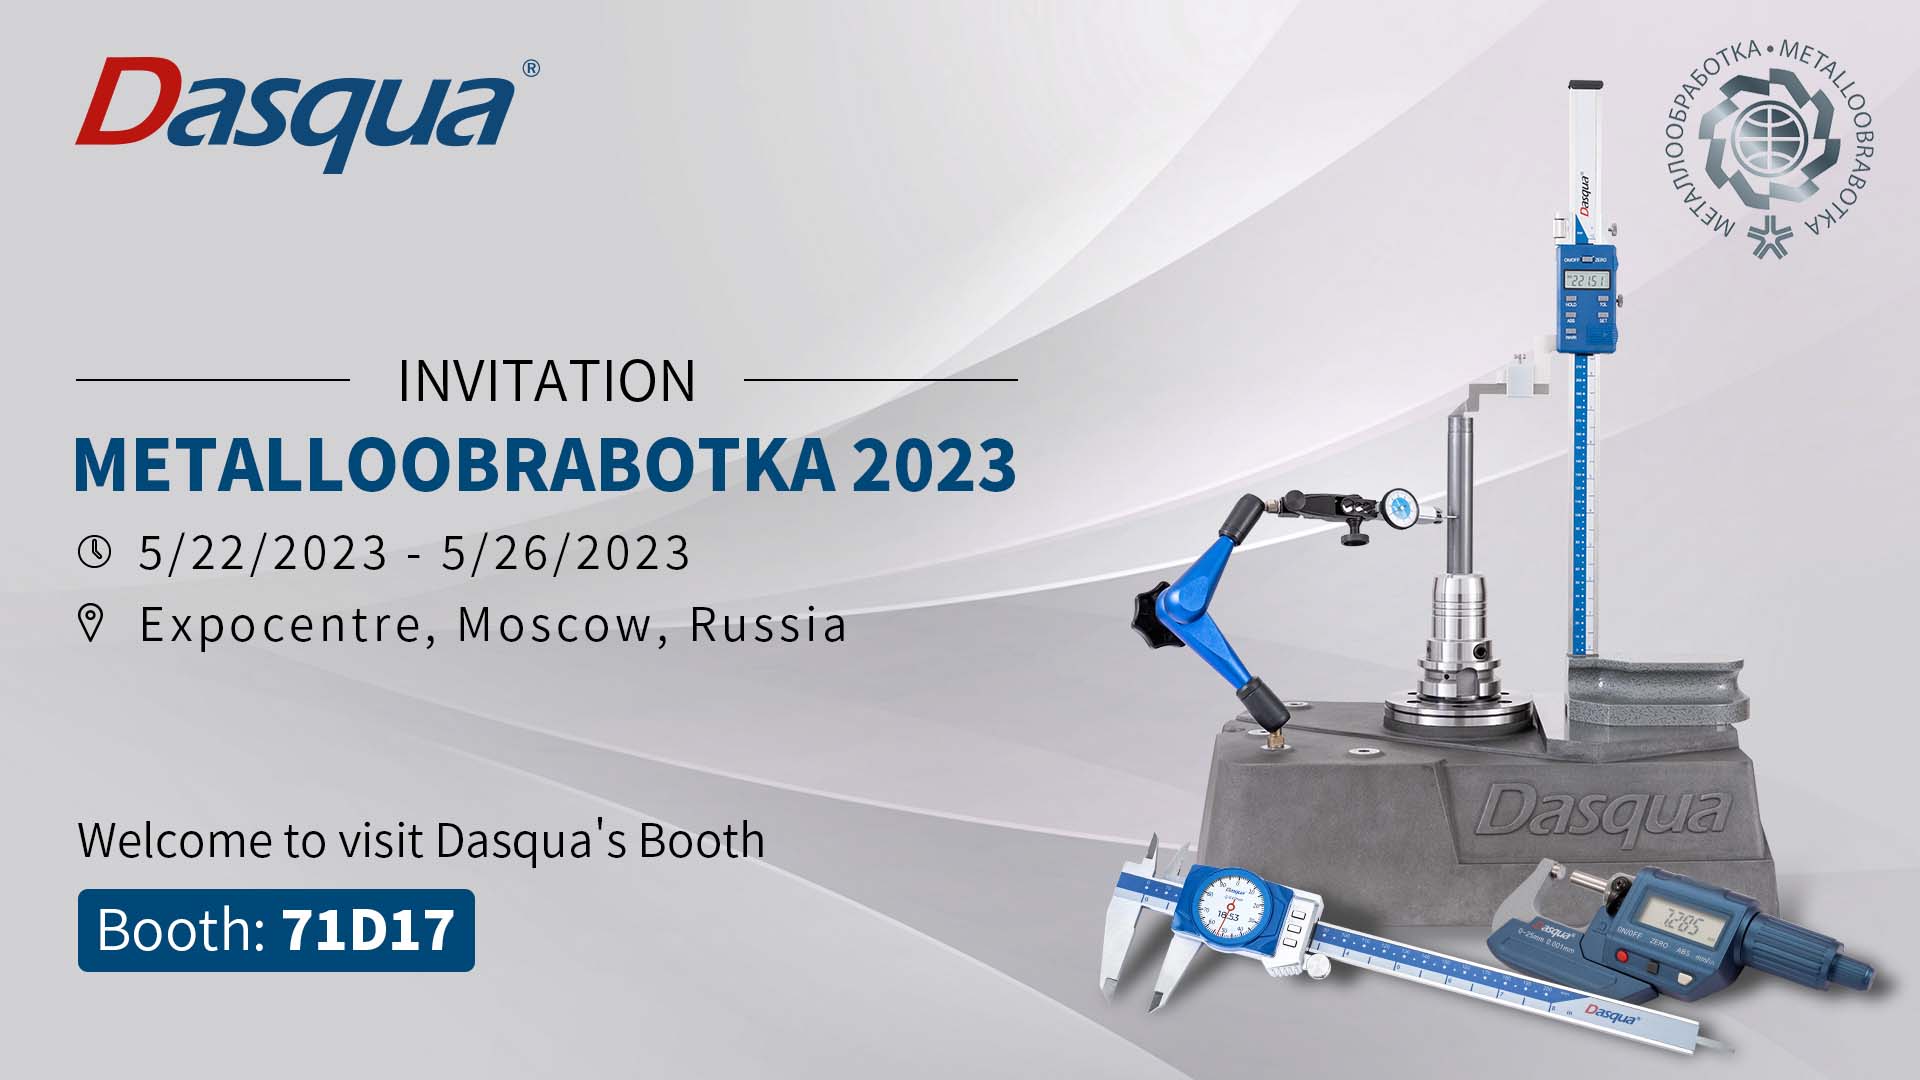 ʻO ka 23th Metalloobrabotka Moscow - International Exhibition for Material Processing Technologies, Machines and Tools